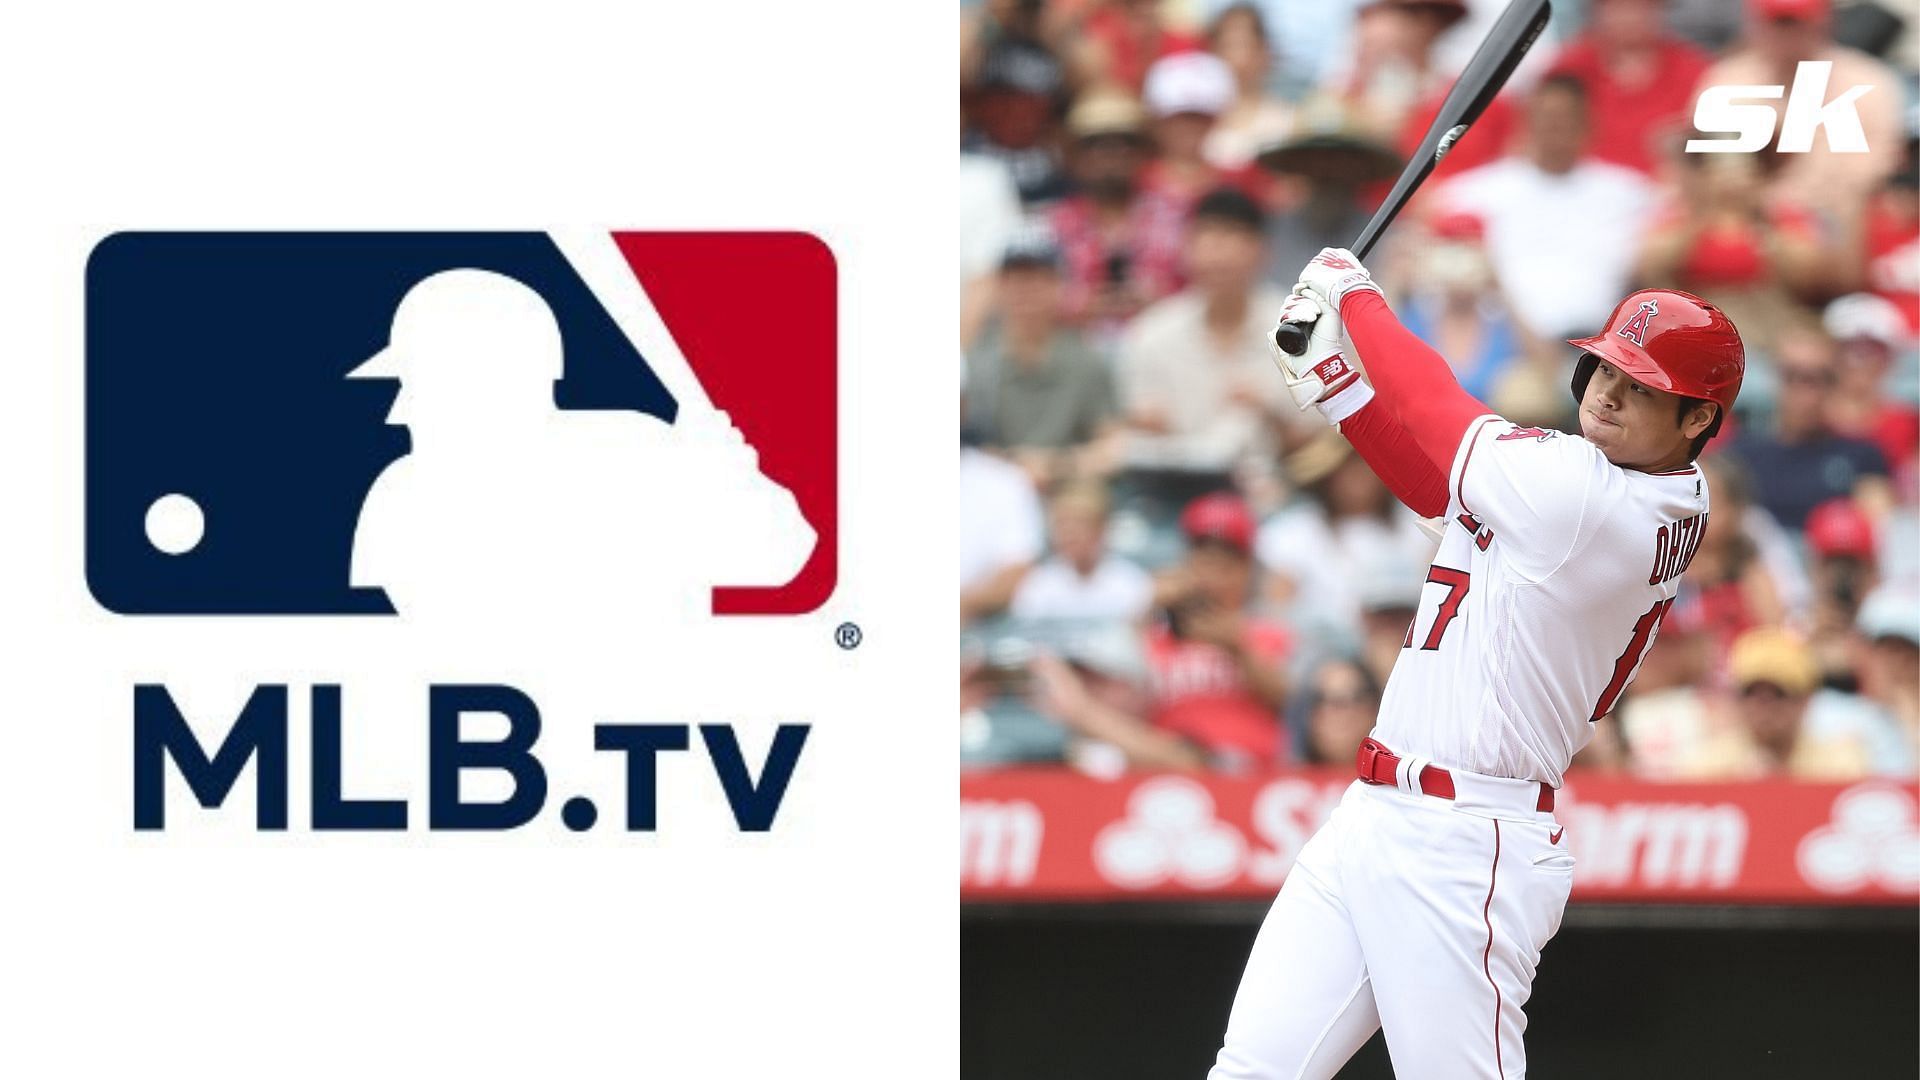 MLB TV College students Can College students watch MLB TV for free